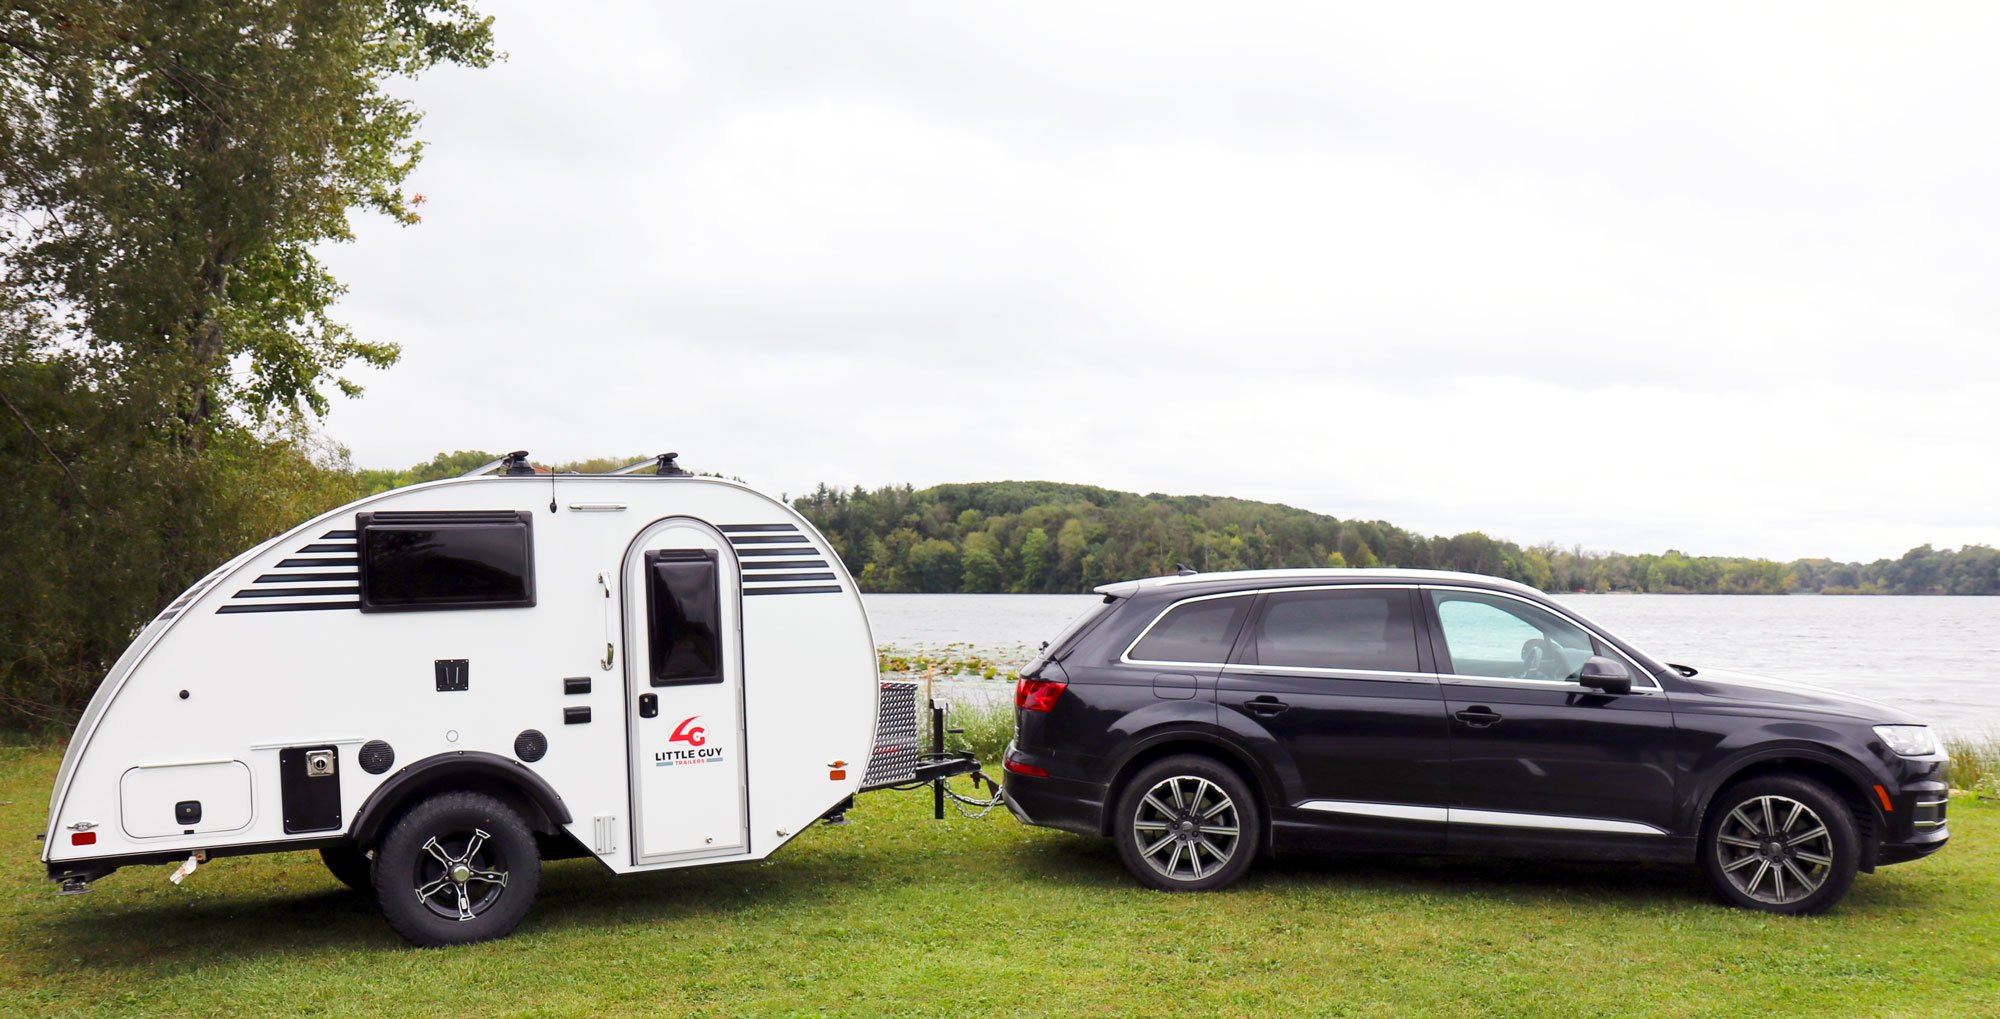 Ultra-lightweight Little Guy travel trailer hitched to black SUV